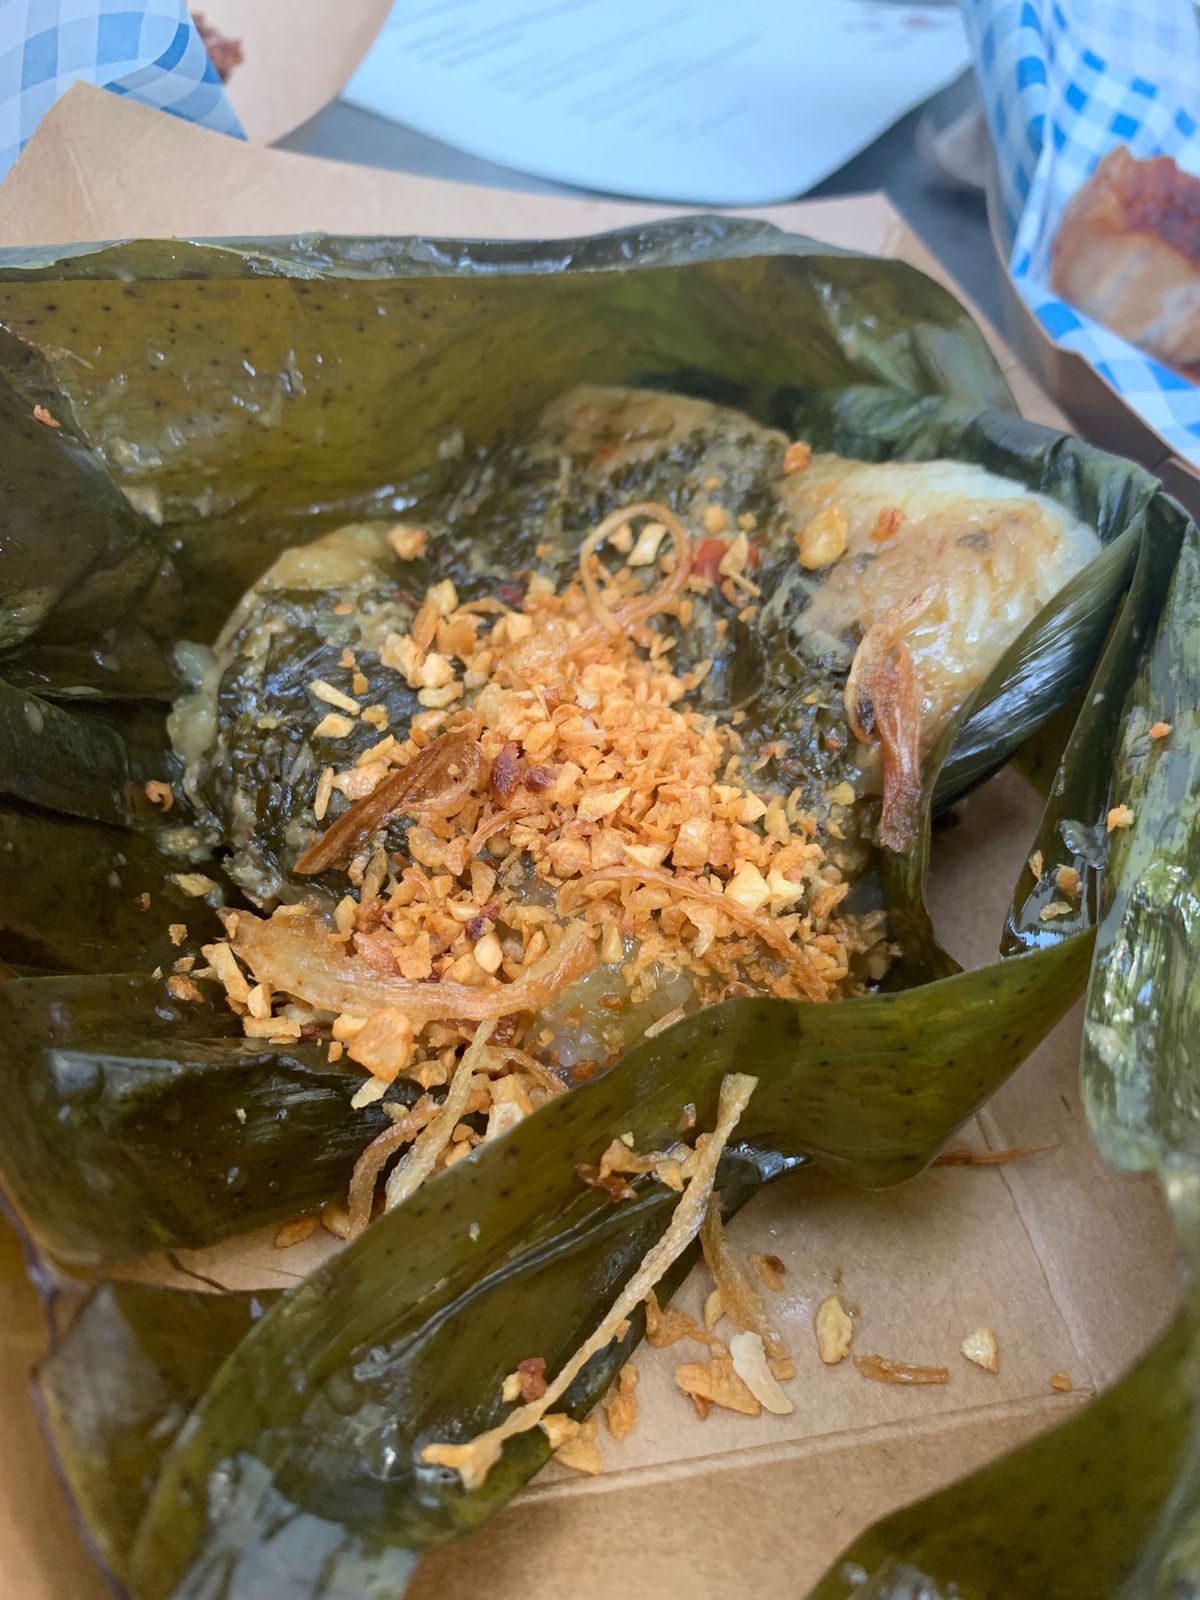 Sticky rice wrapped in a banana leaf, with kale, ginger, and chilli.